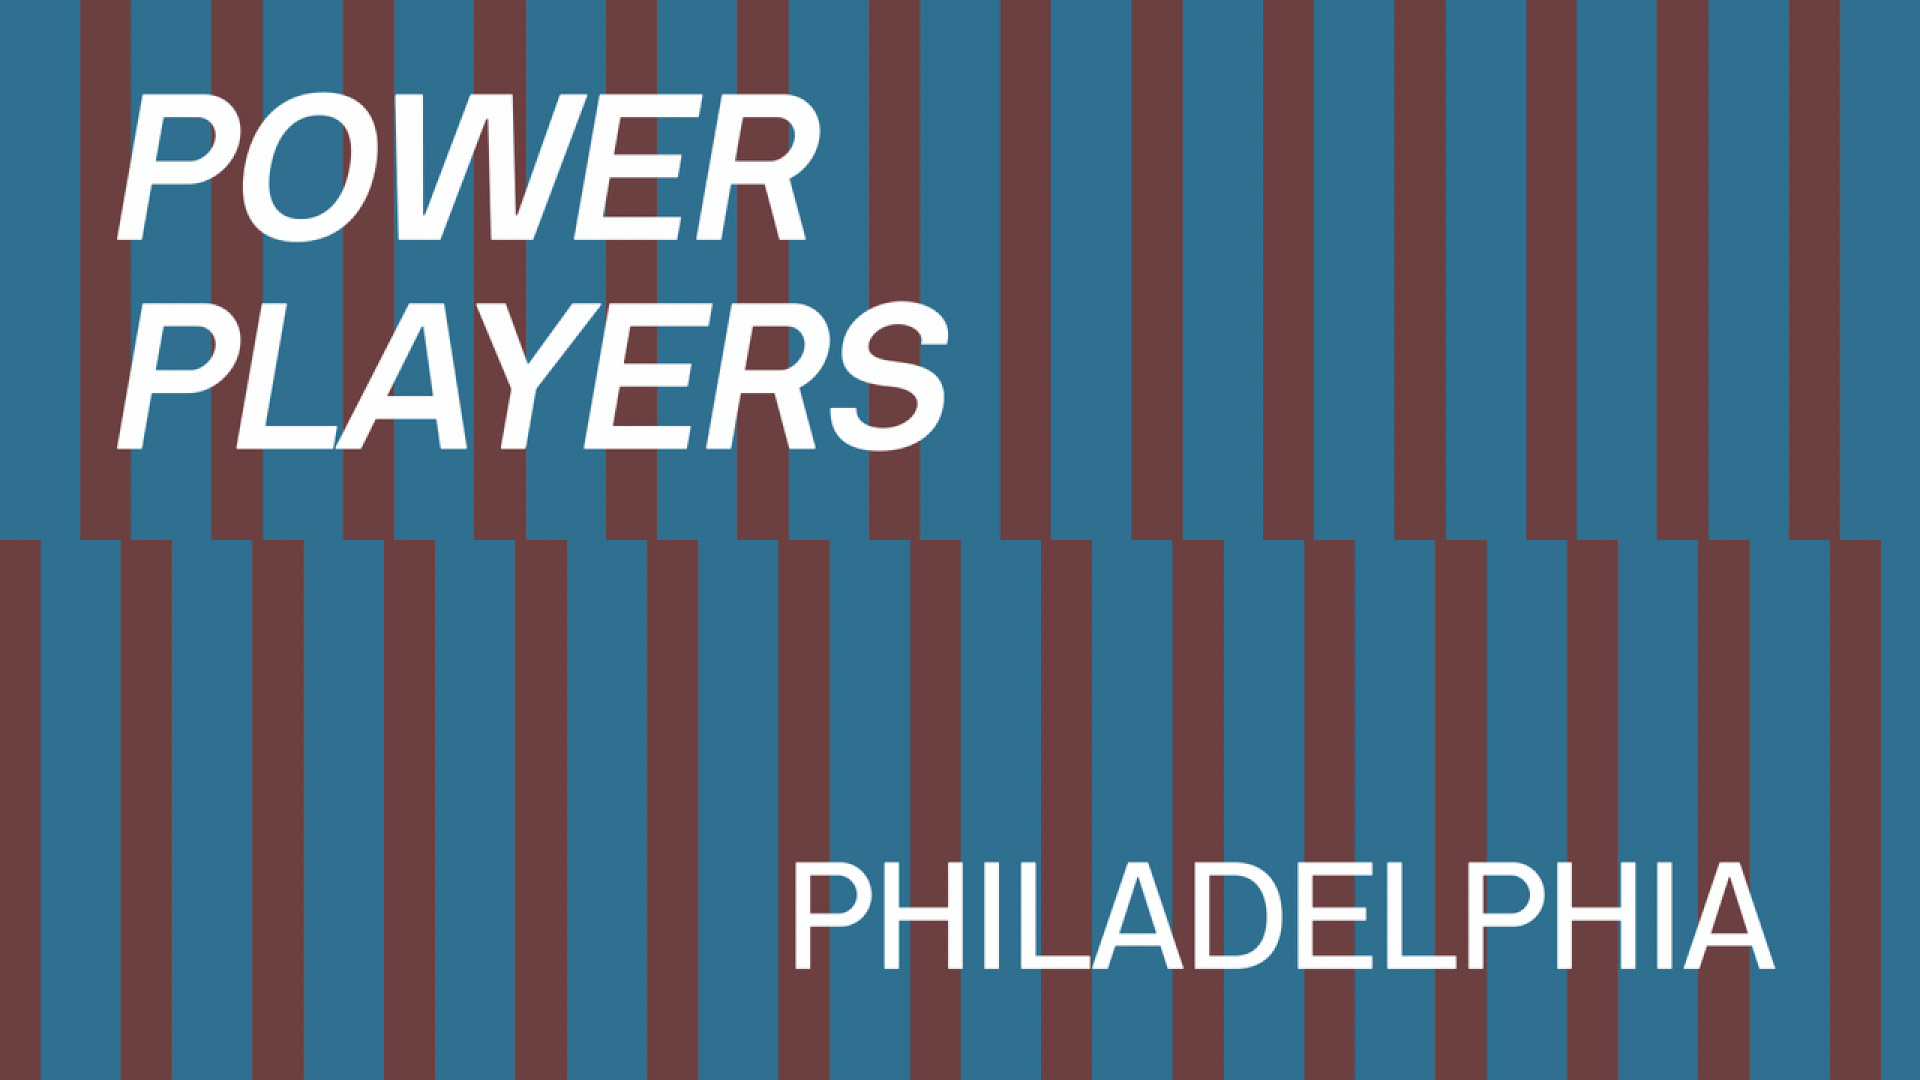 Illustration of two rows of dominos falling with text overlaid that reads Power Players Philadelphia.